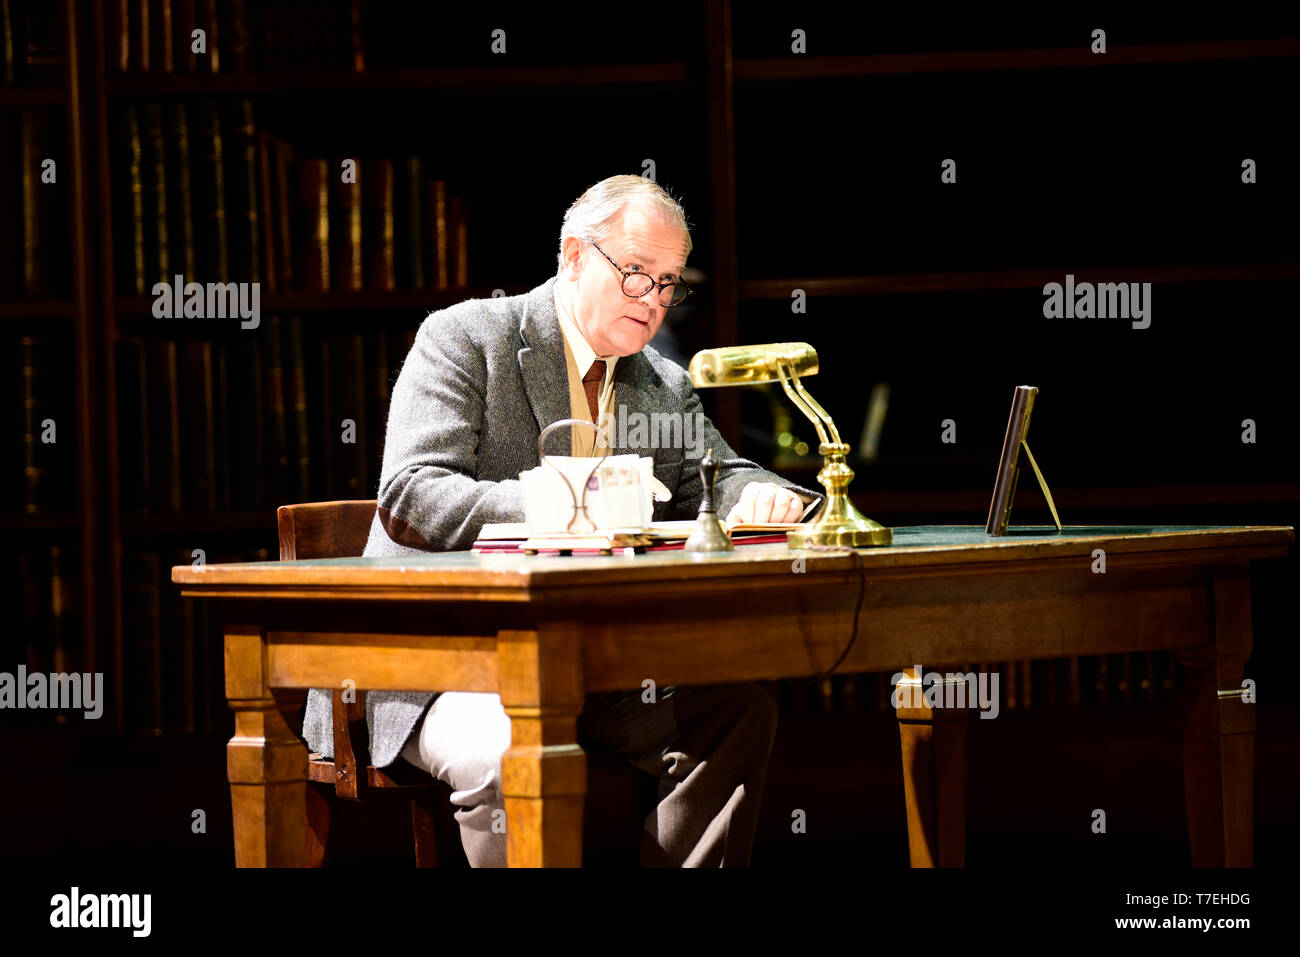 Hugh Bonneville playing writer C.S. Lewis in Shadowlands, a play written by William Nicholson at Chichester Festival Theatre, West Sussex, UK. Stock Photo